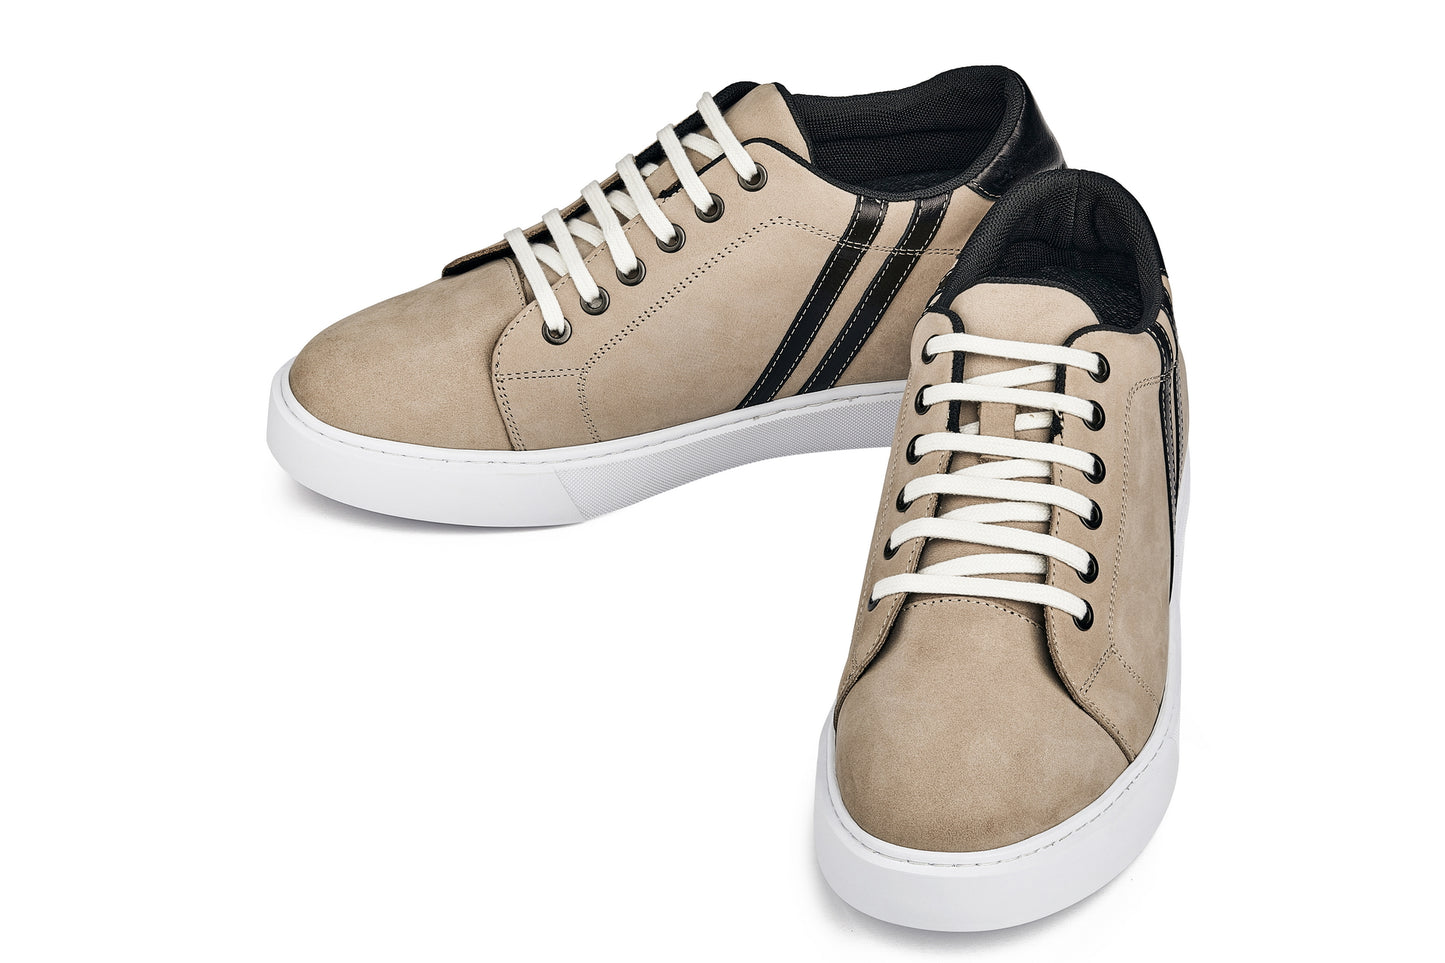 CALTO - K1552 - 2.8 Inches Taller (Taupe) - Lace Up Casual Sneakers